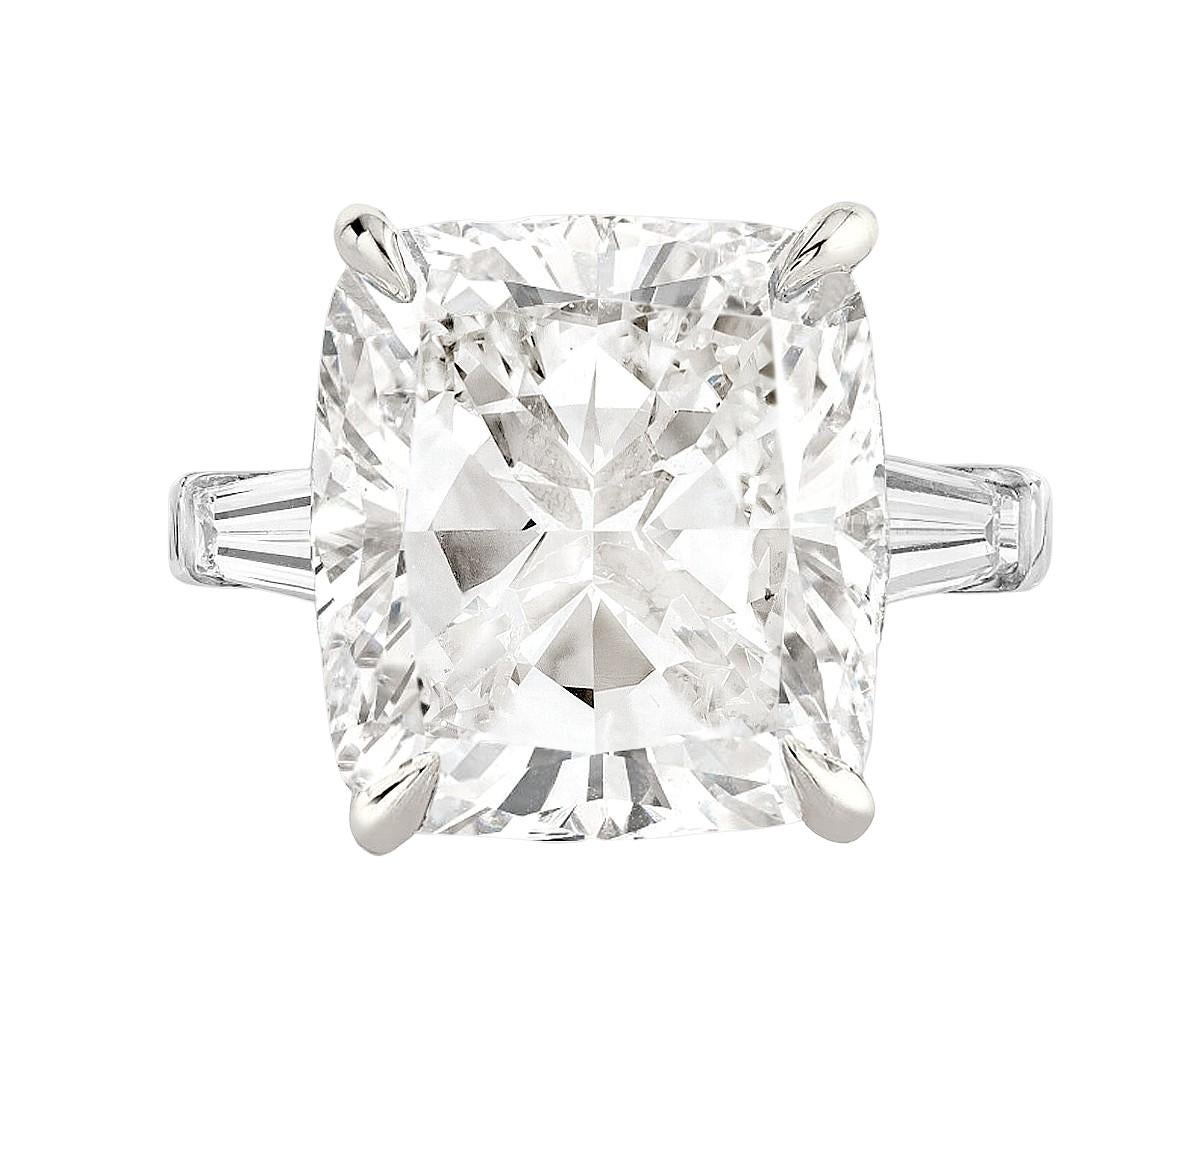 Introducing the stunning GIA Certified 4.01 Carat Cushion Cut Diamond Ring, enhanced by tapered baguette diamonds. This exquisite ring features a captivating cushion-cut diamond, certified by the renowned Gemological Institute of America (GIA) for